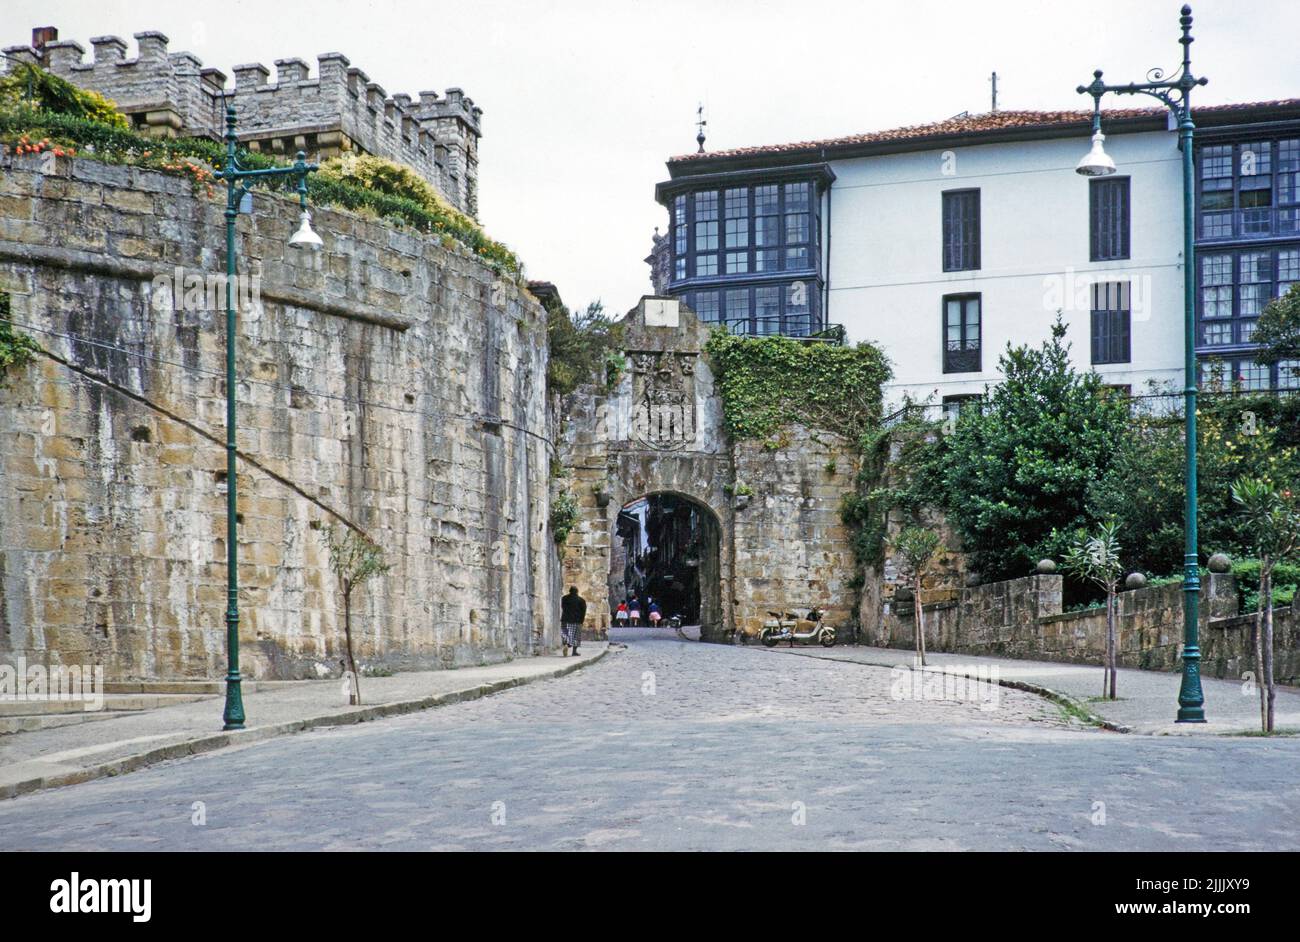 Entrance arch and historic buildings in Old Town of Hondarribia or Fuenterrabía, Basque country, northern Spain, 1959 Stock Photo